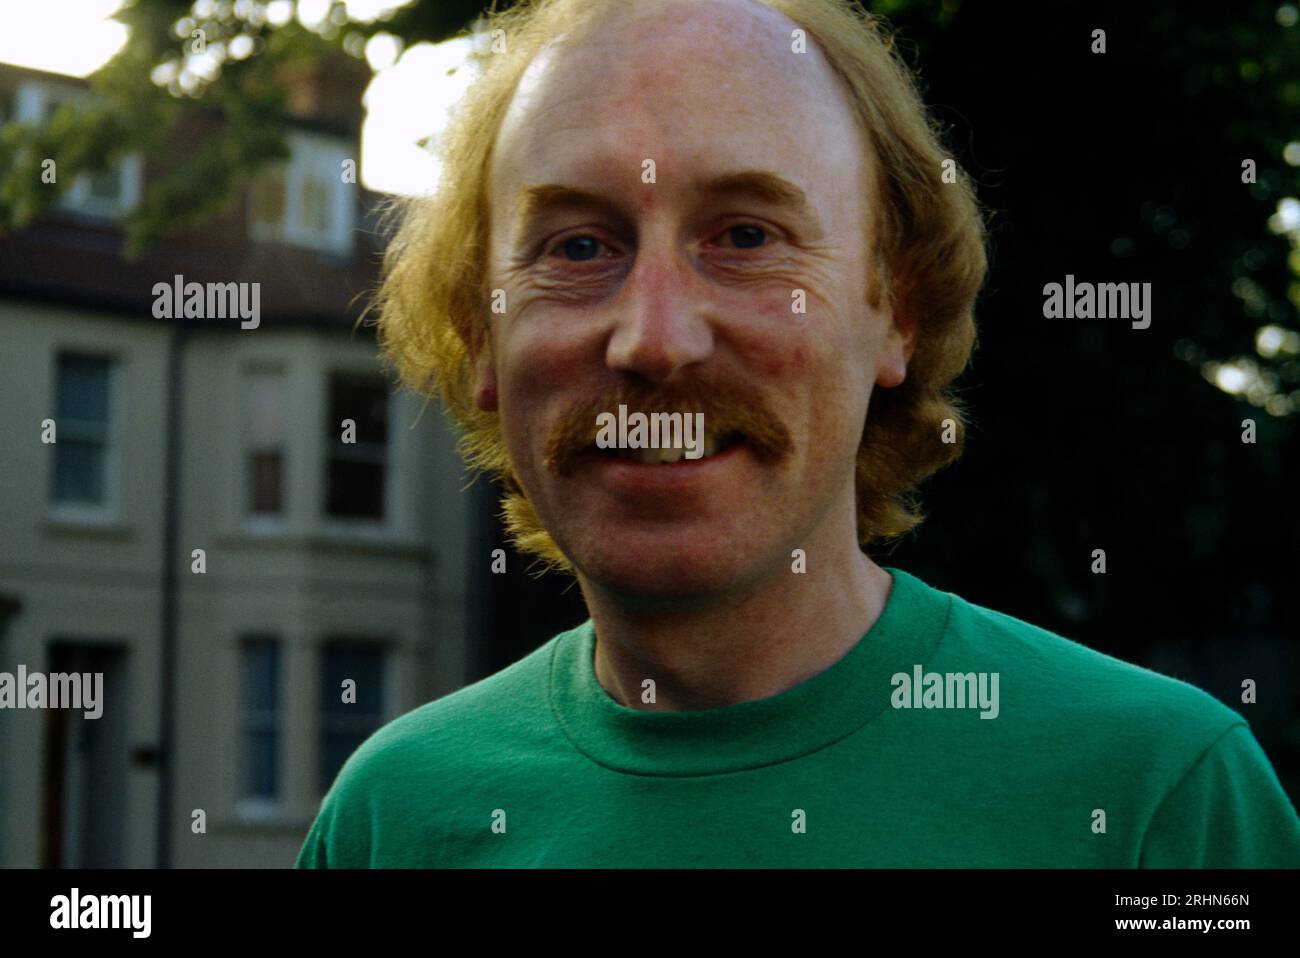 Portrait of Man in His Late 40's with Ginger hair and Moustache Smiling Stock Photo